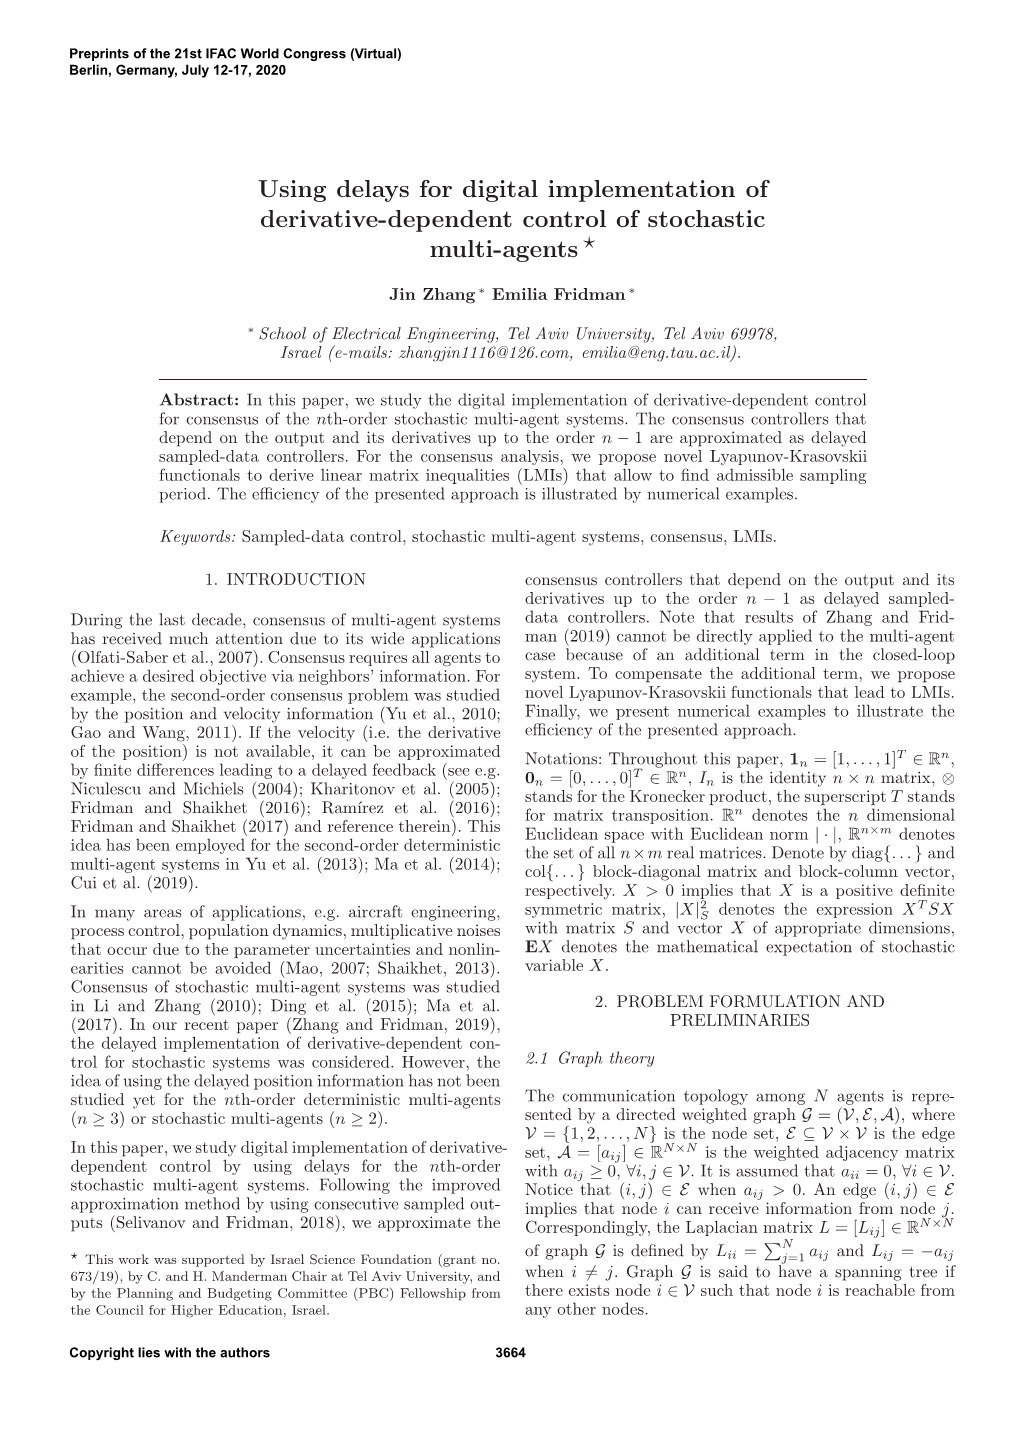 Using Delays for Digital Implementation of Derivative-Dependent Control of Stochastic ⋆ Multi-Agents